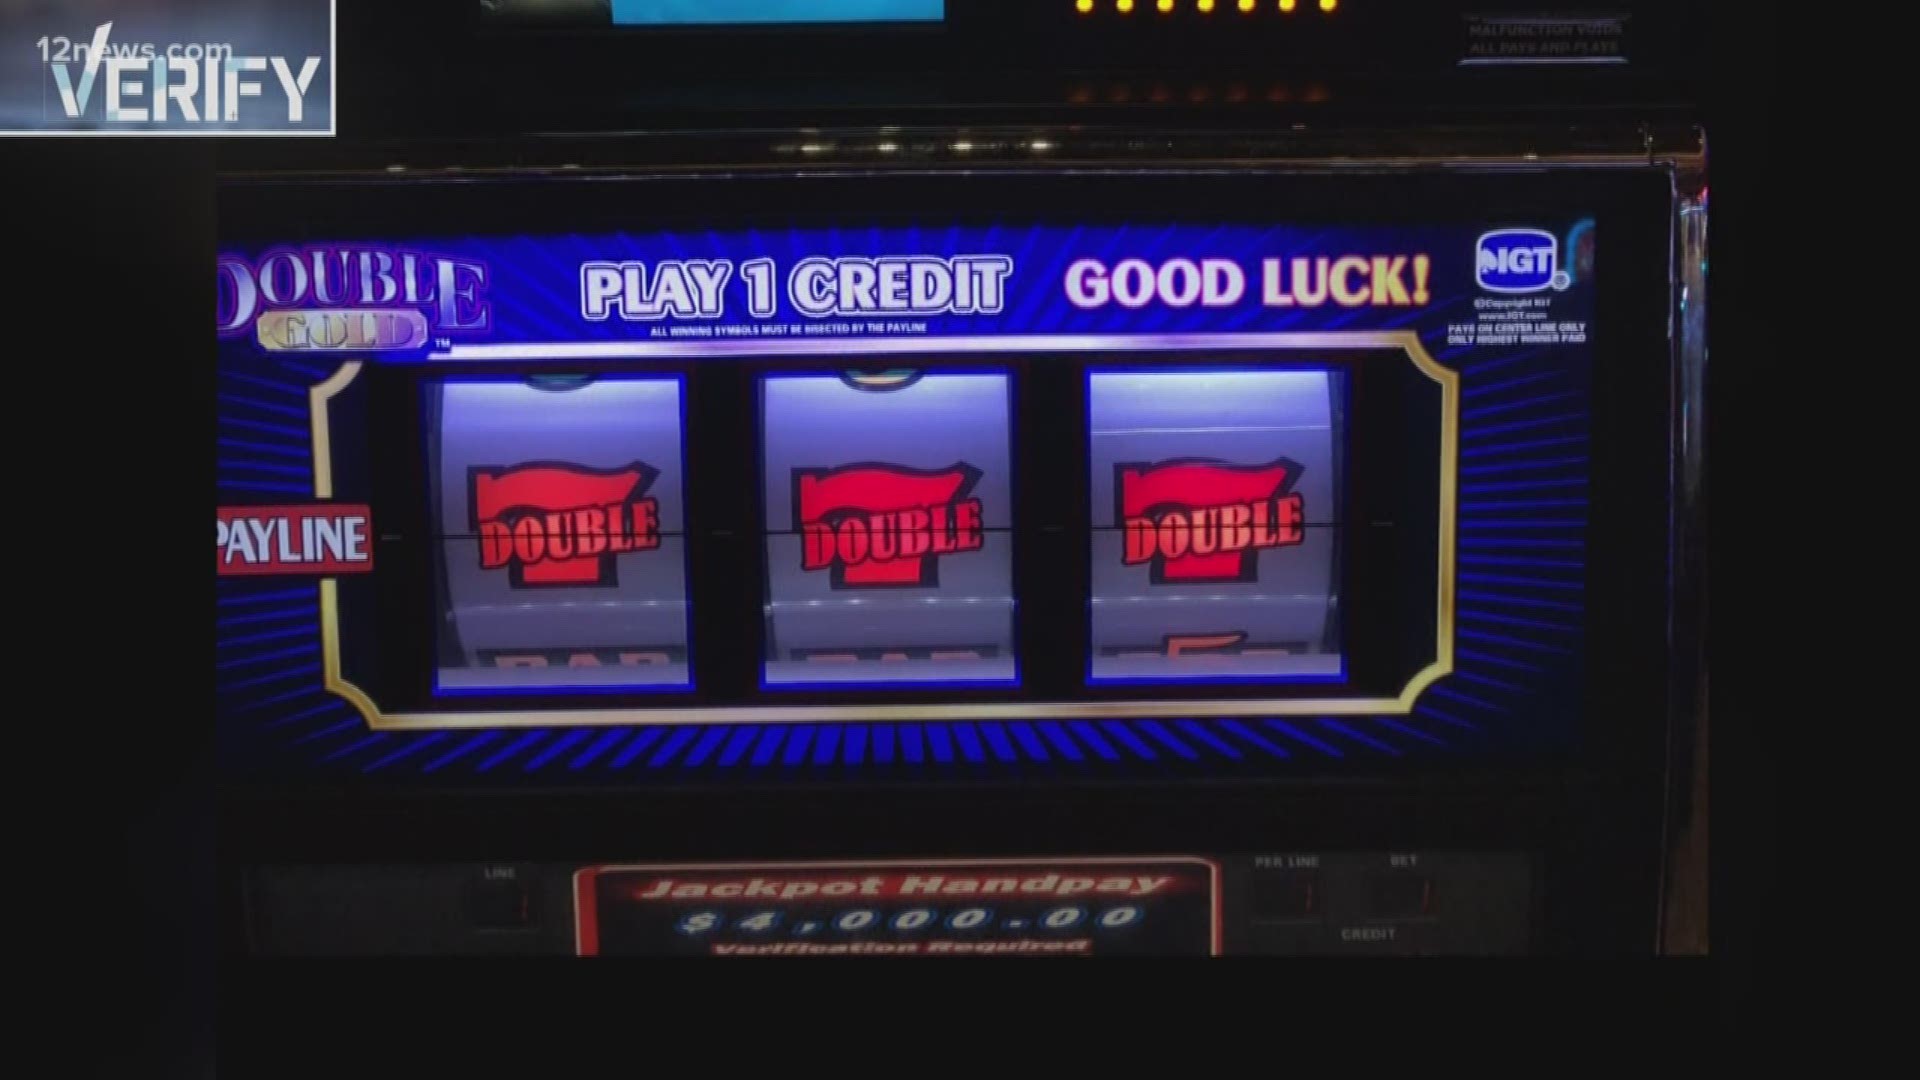 A Valley man says he won a $50,000 jackpot, but the machine only paid out $4,000. We verify your rights when you win big at a casino.